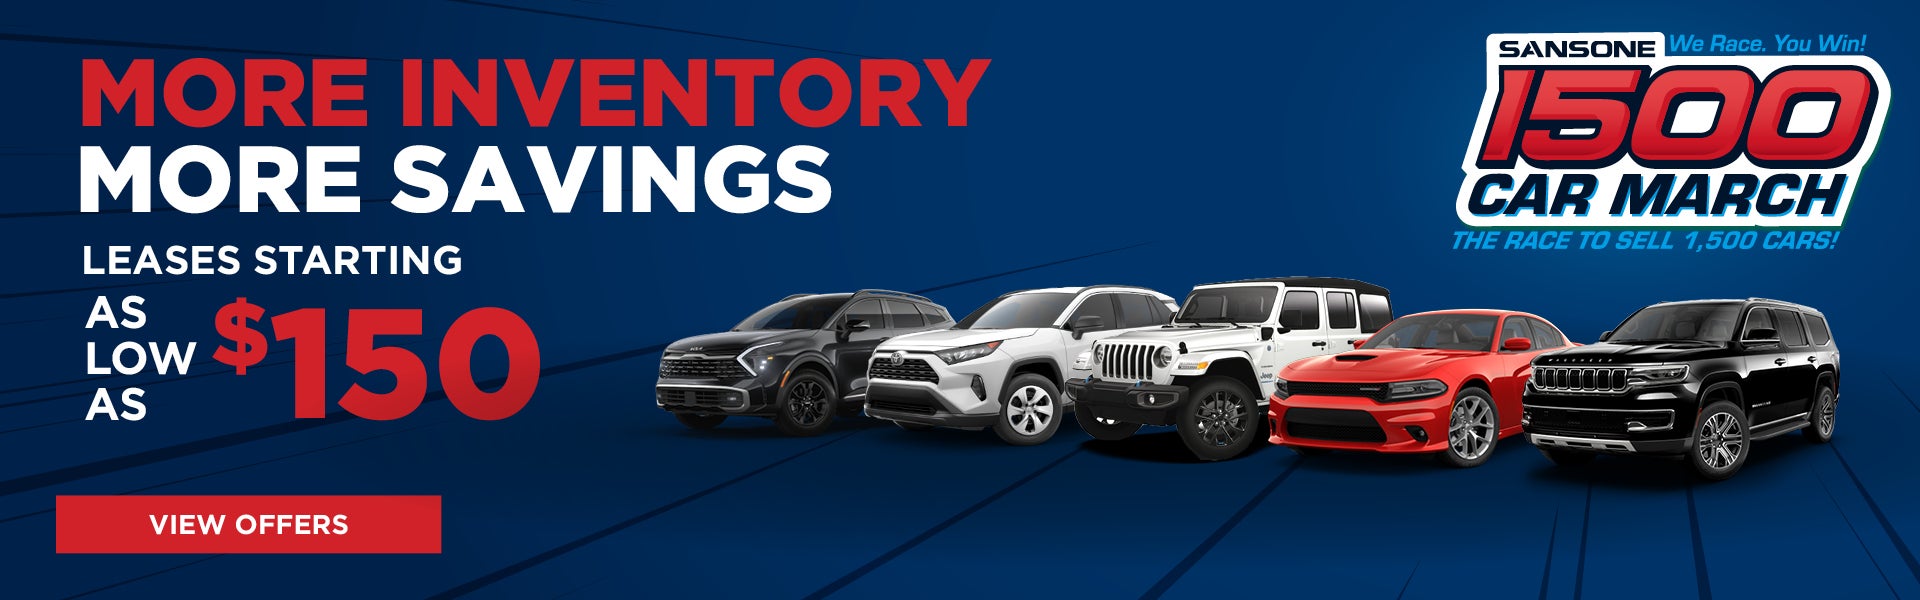 More Inventory, More Savings - 1500 Car March